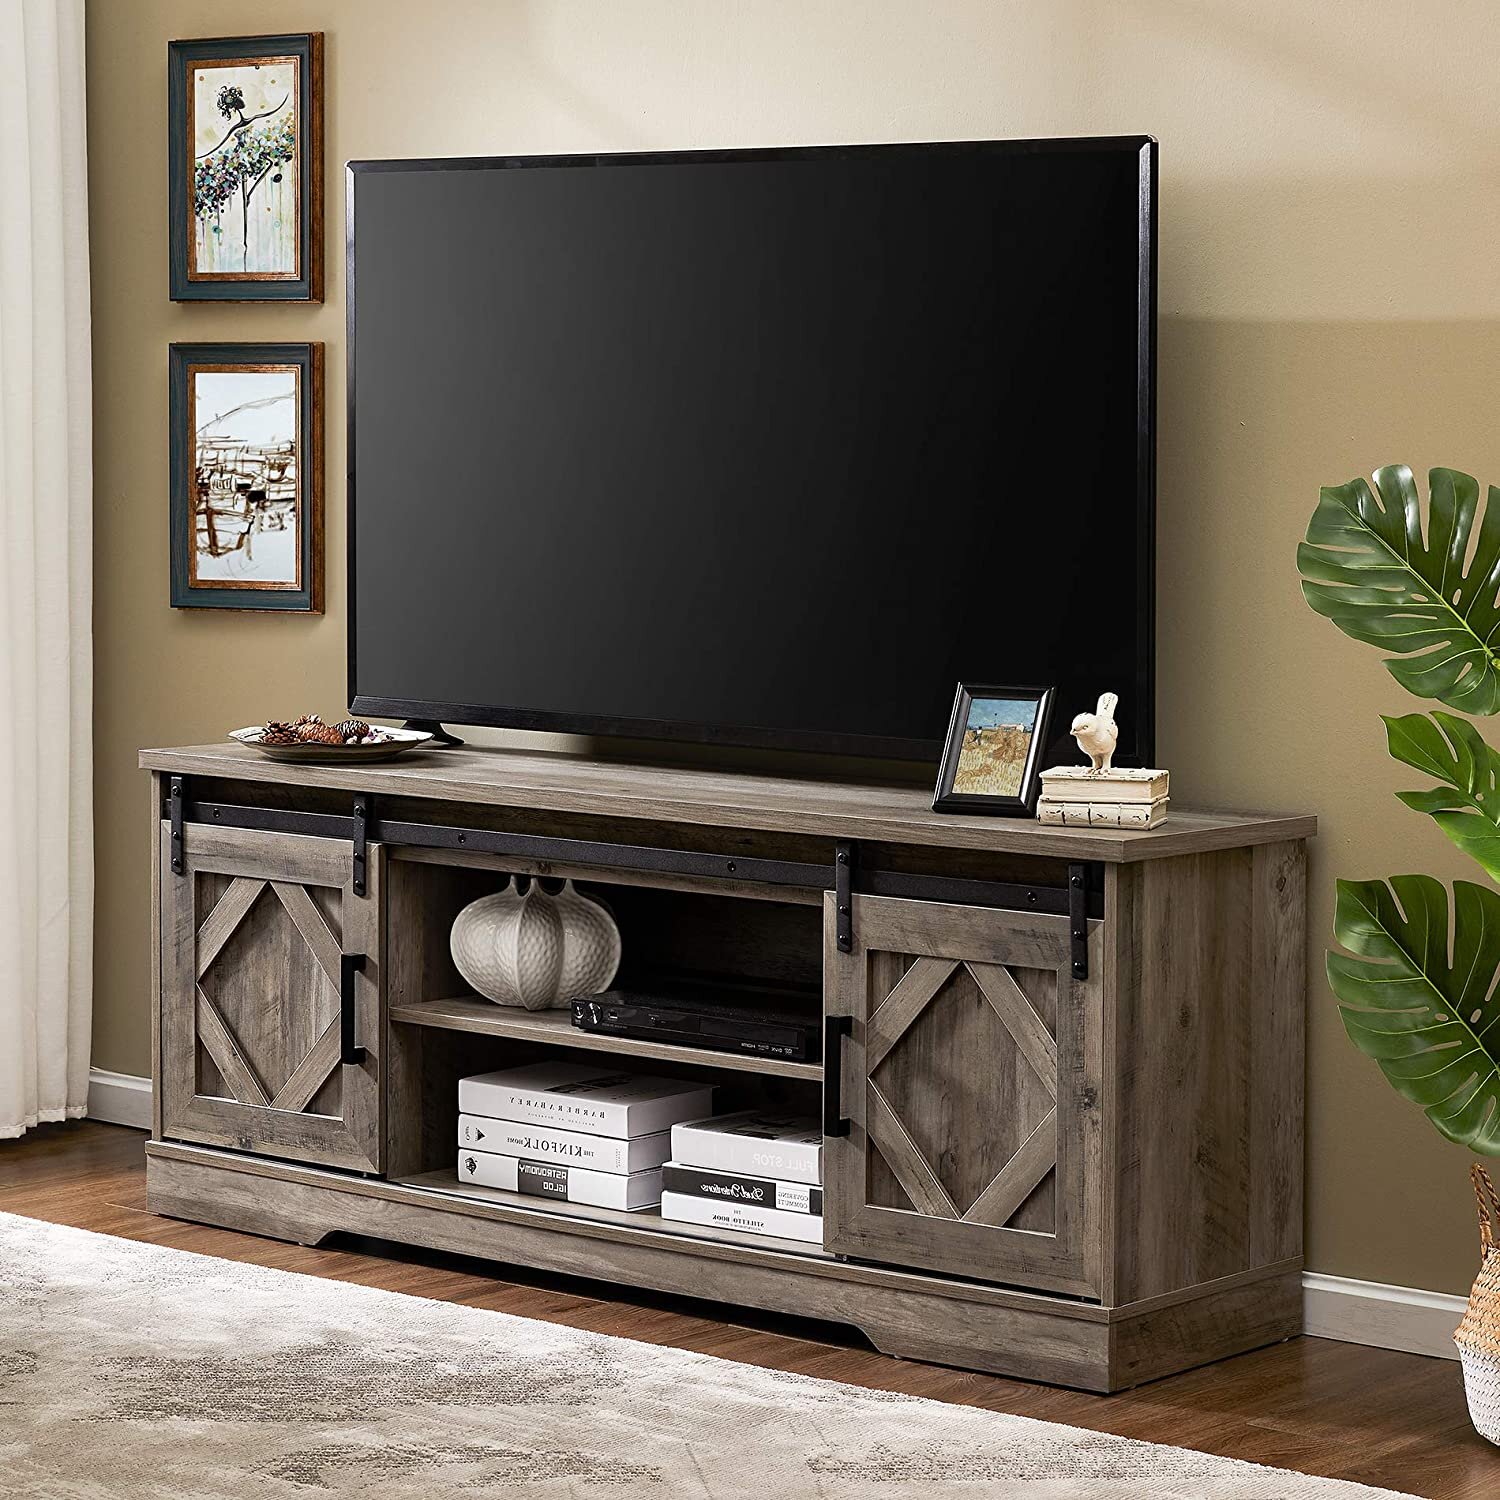 Farmhouse TV Stand Television Entertainment Center Wood Media Console Cabinet